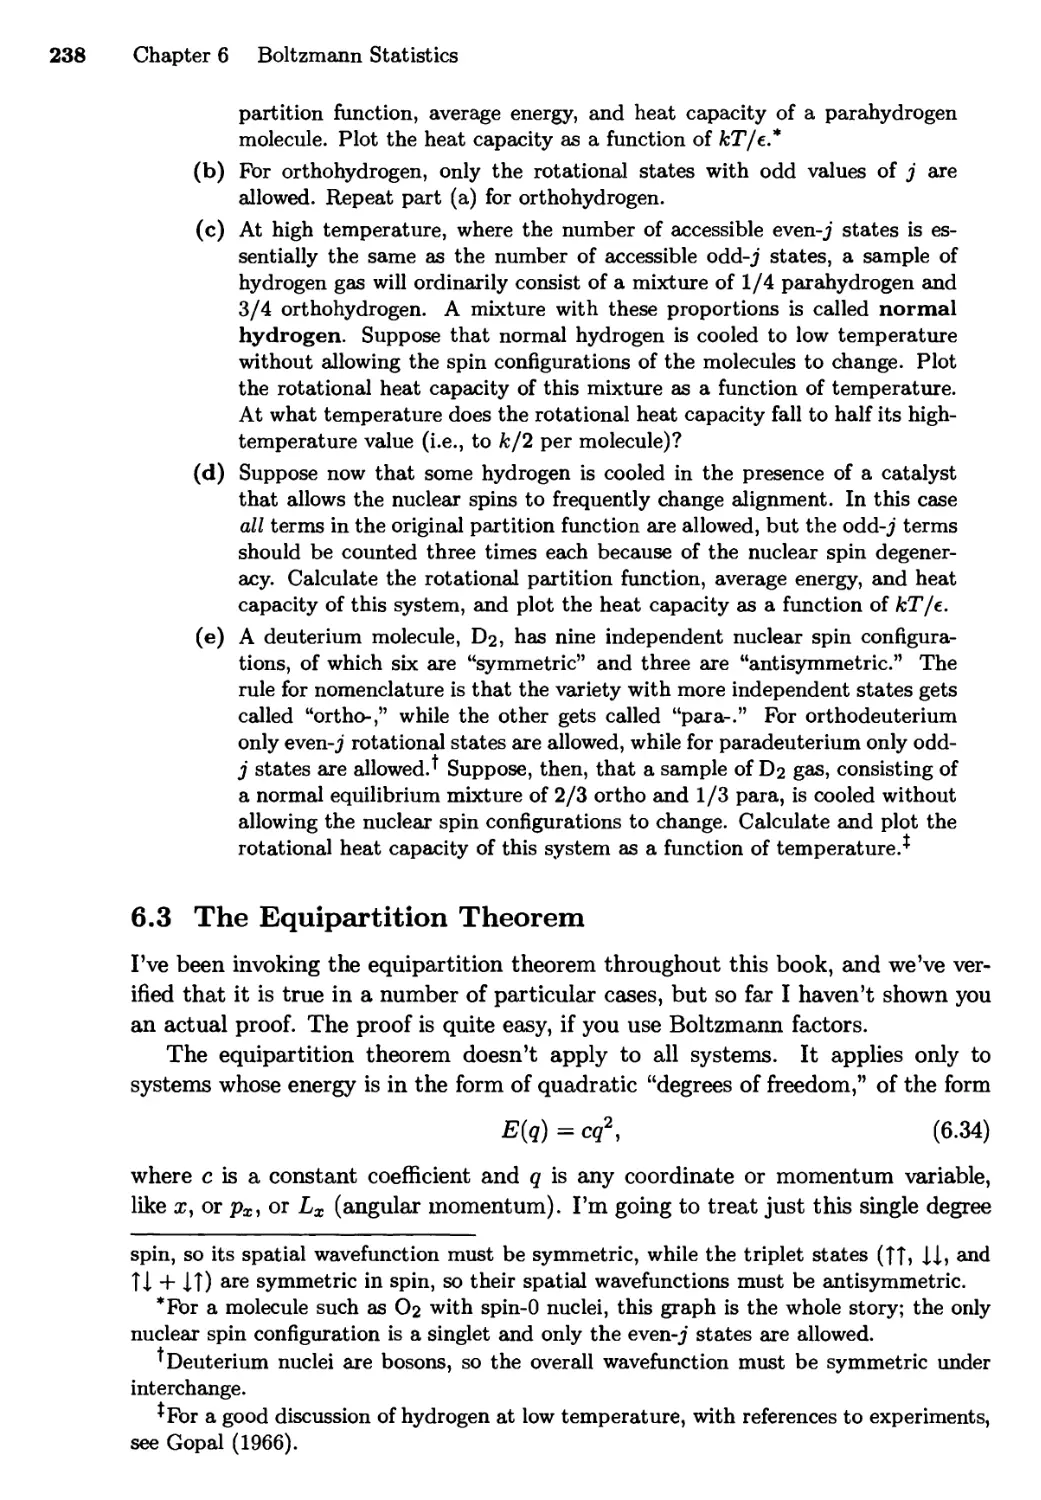 6.3 The Equipartition Theorem